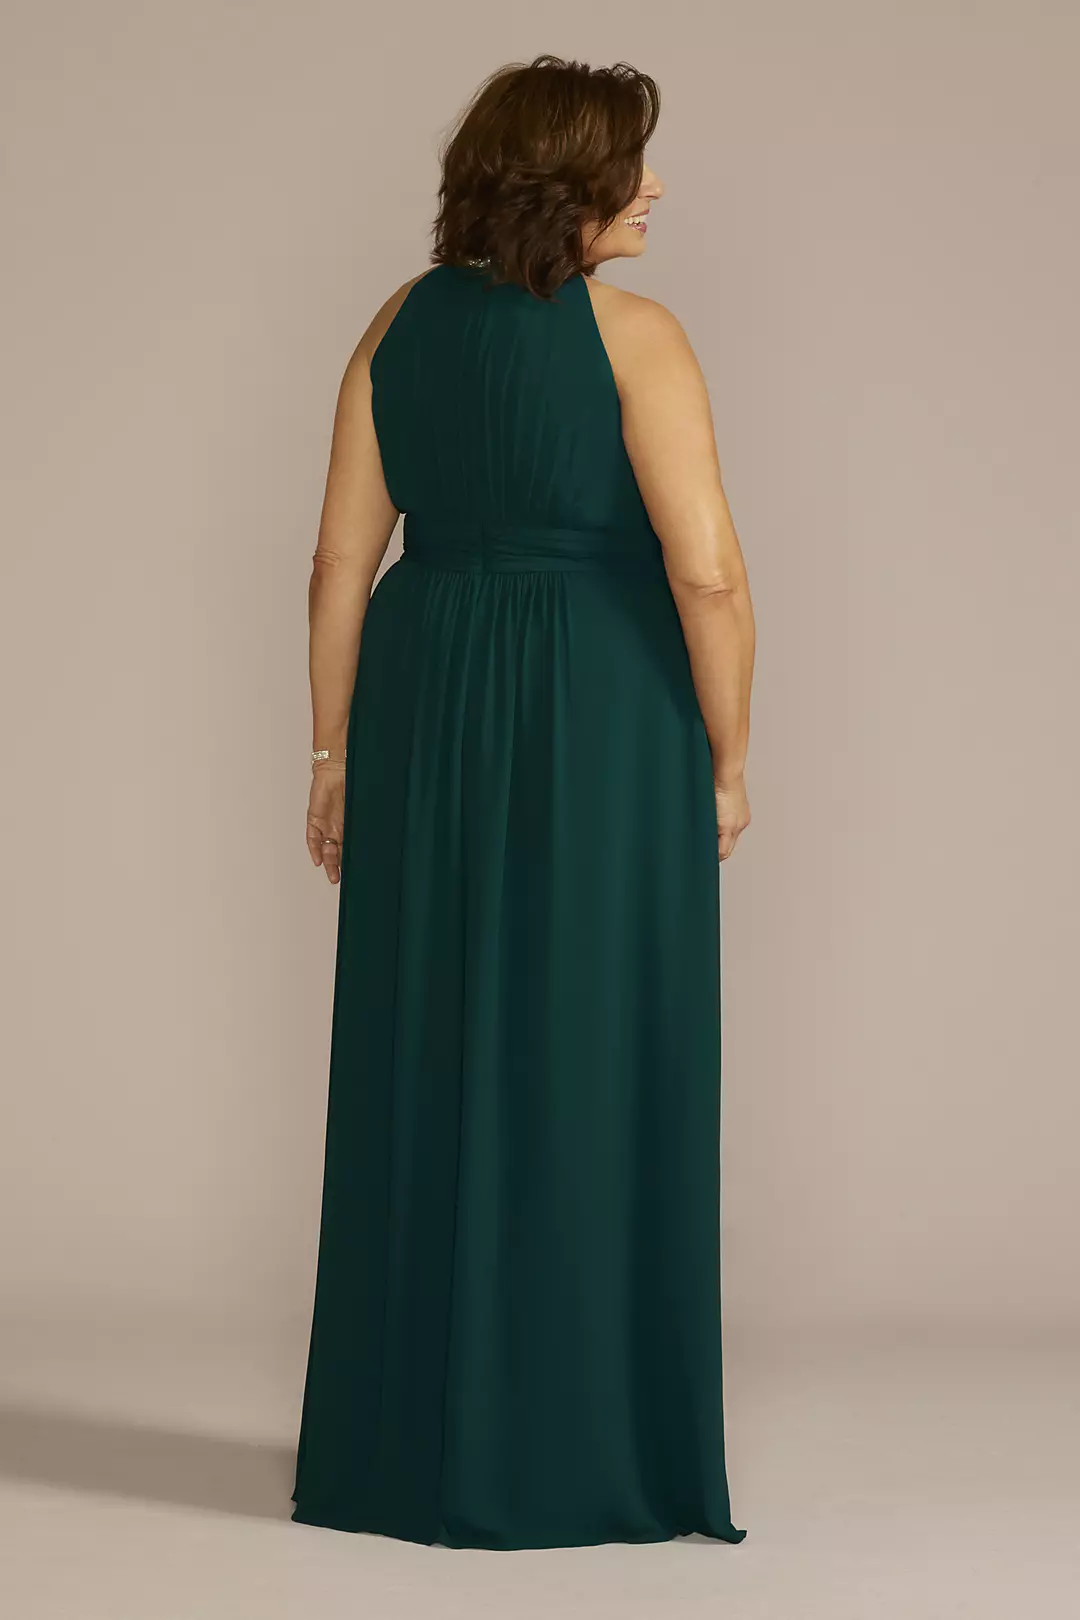 Georgette Gown with Keyhole and Jeweled Neckline Image 2